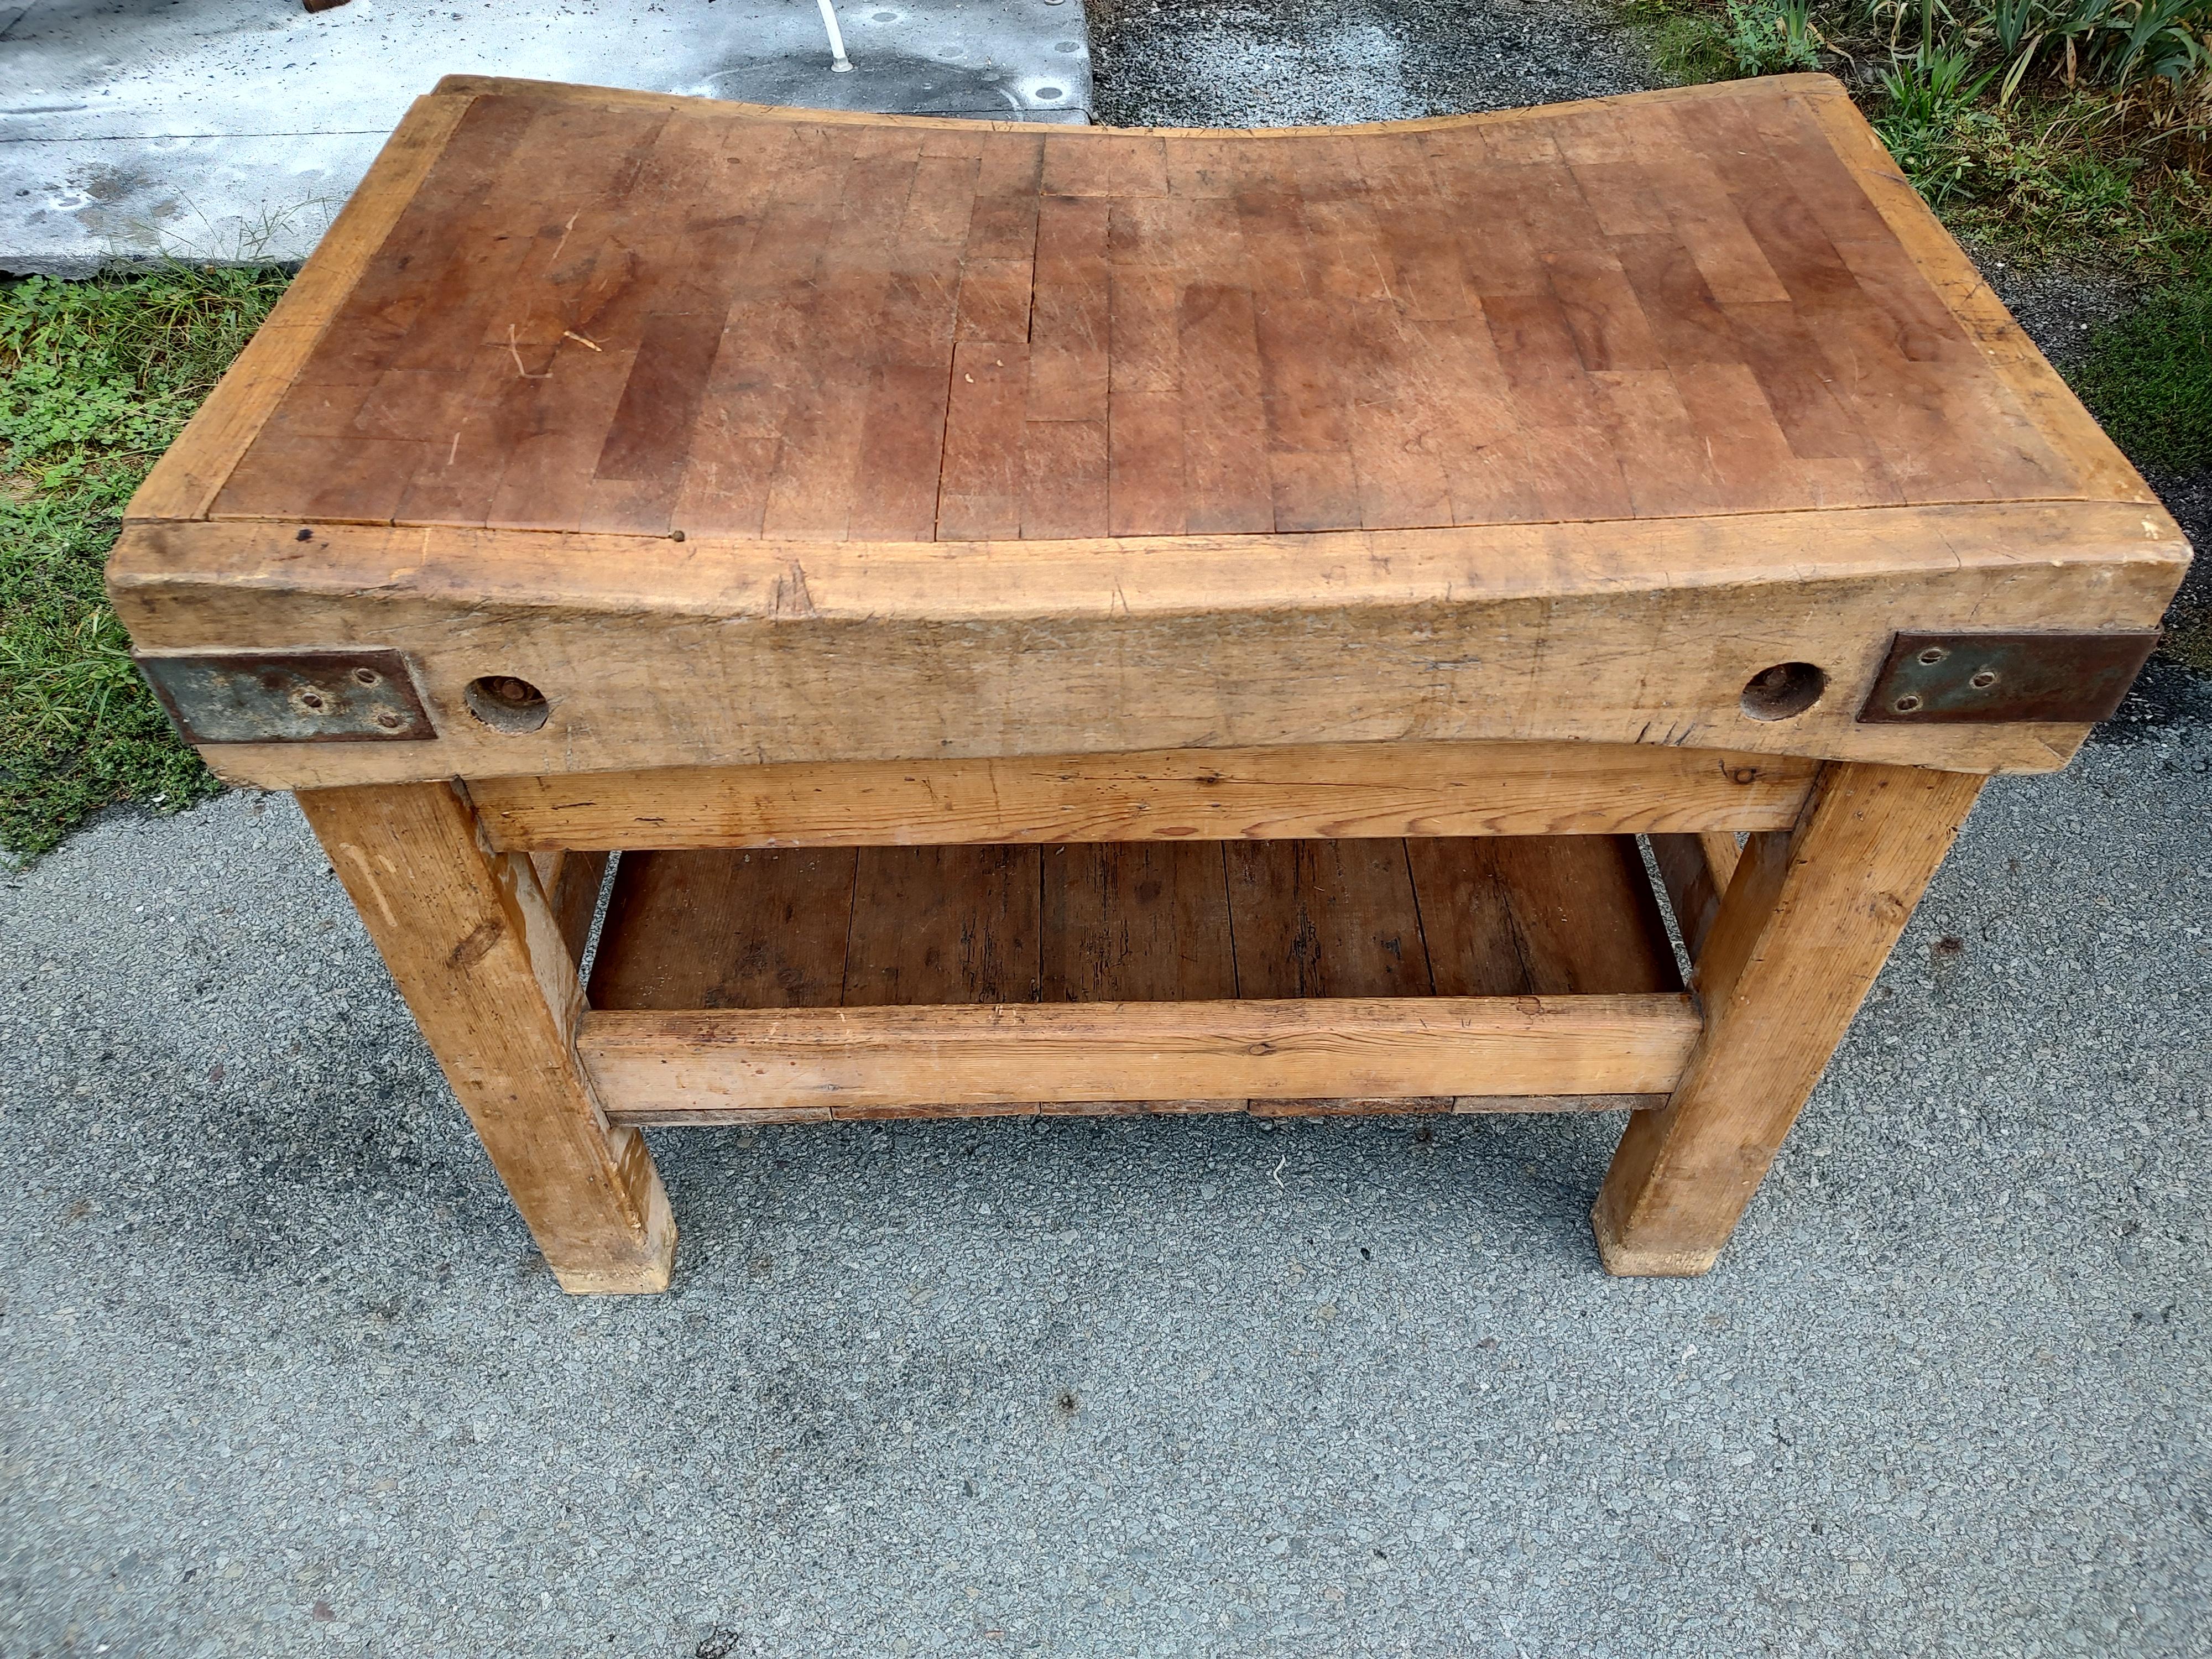 Fabulous and incredibly perfectly worn on both sides of the butcher block. 19th century and from England this hand crafted maple butchers block sits atop a pine base which is very sturdy, no movement at all. Iron straps at the corners along with